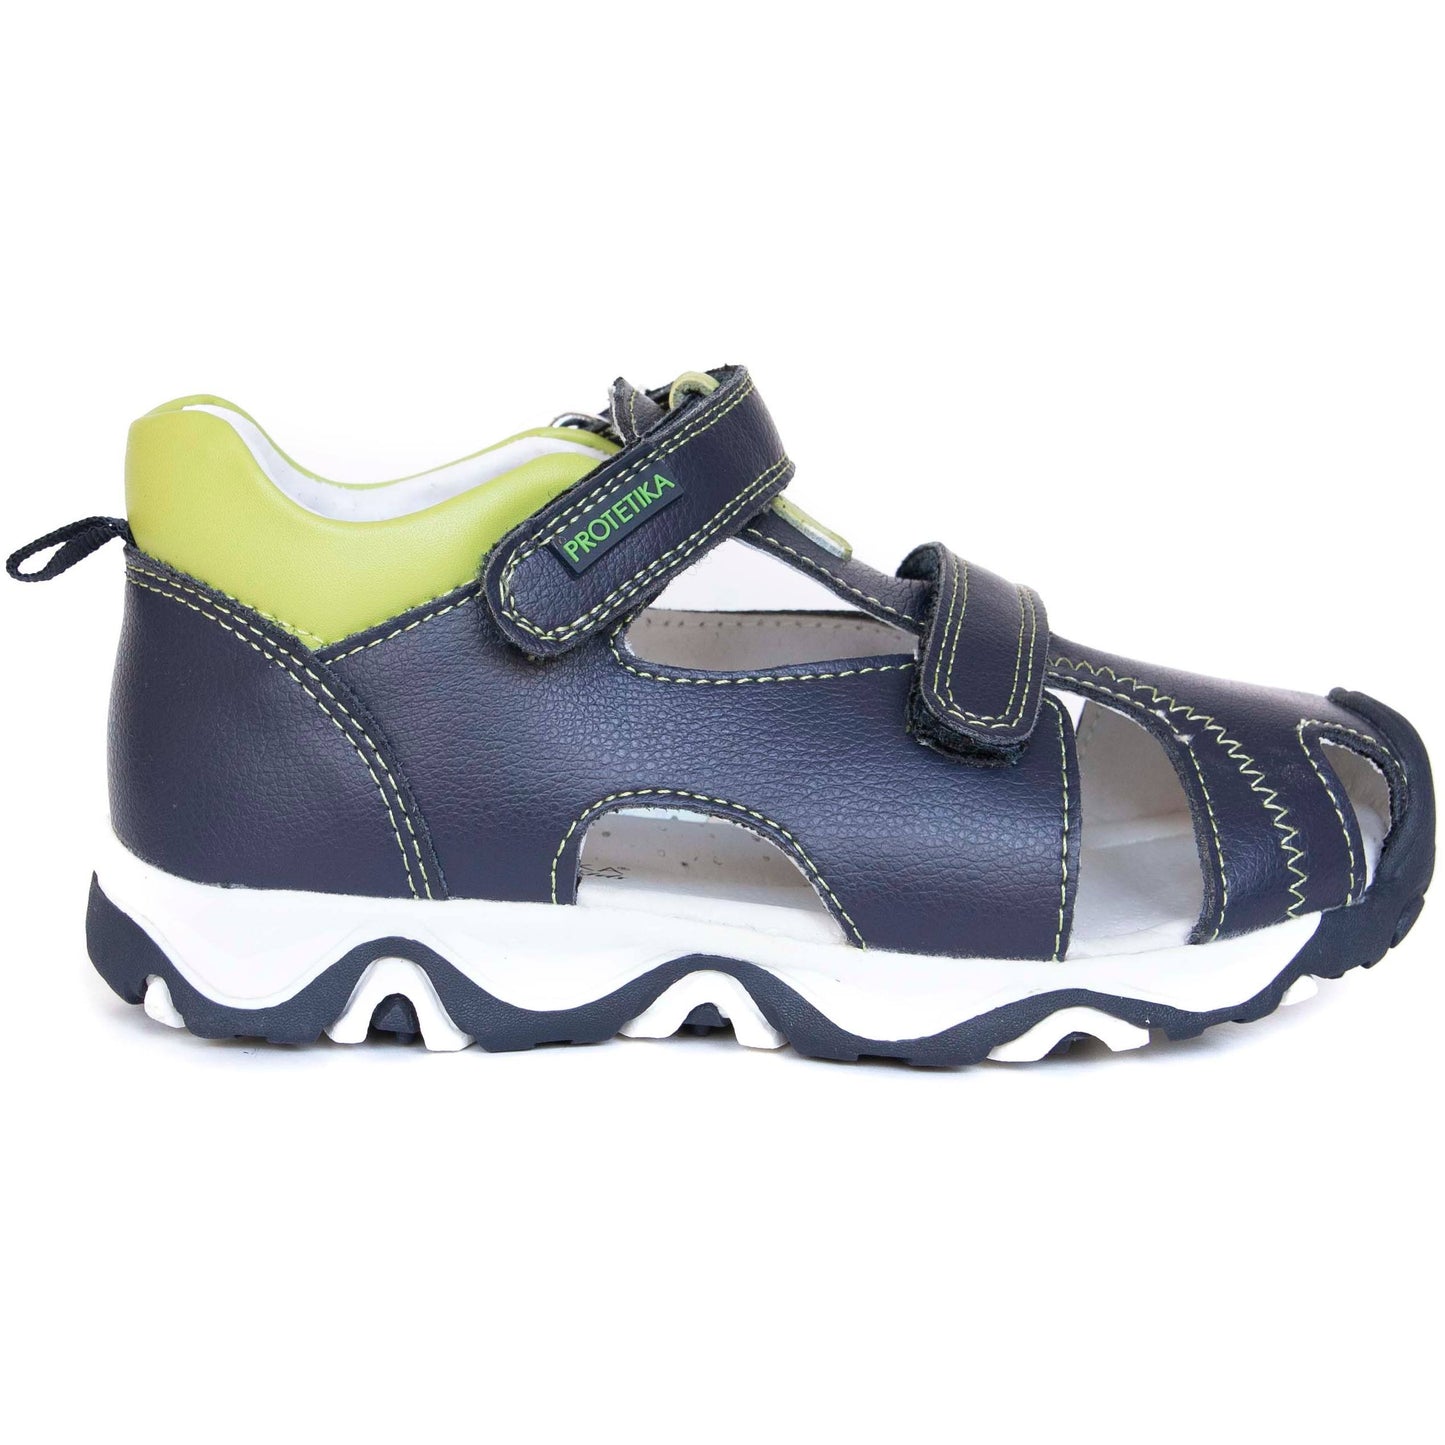 SPARKY older boys arch support sandals - feelgoodshoes.ae